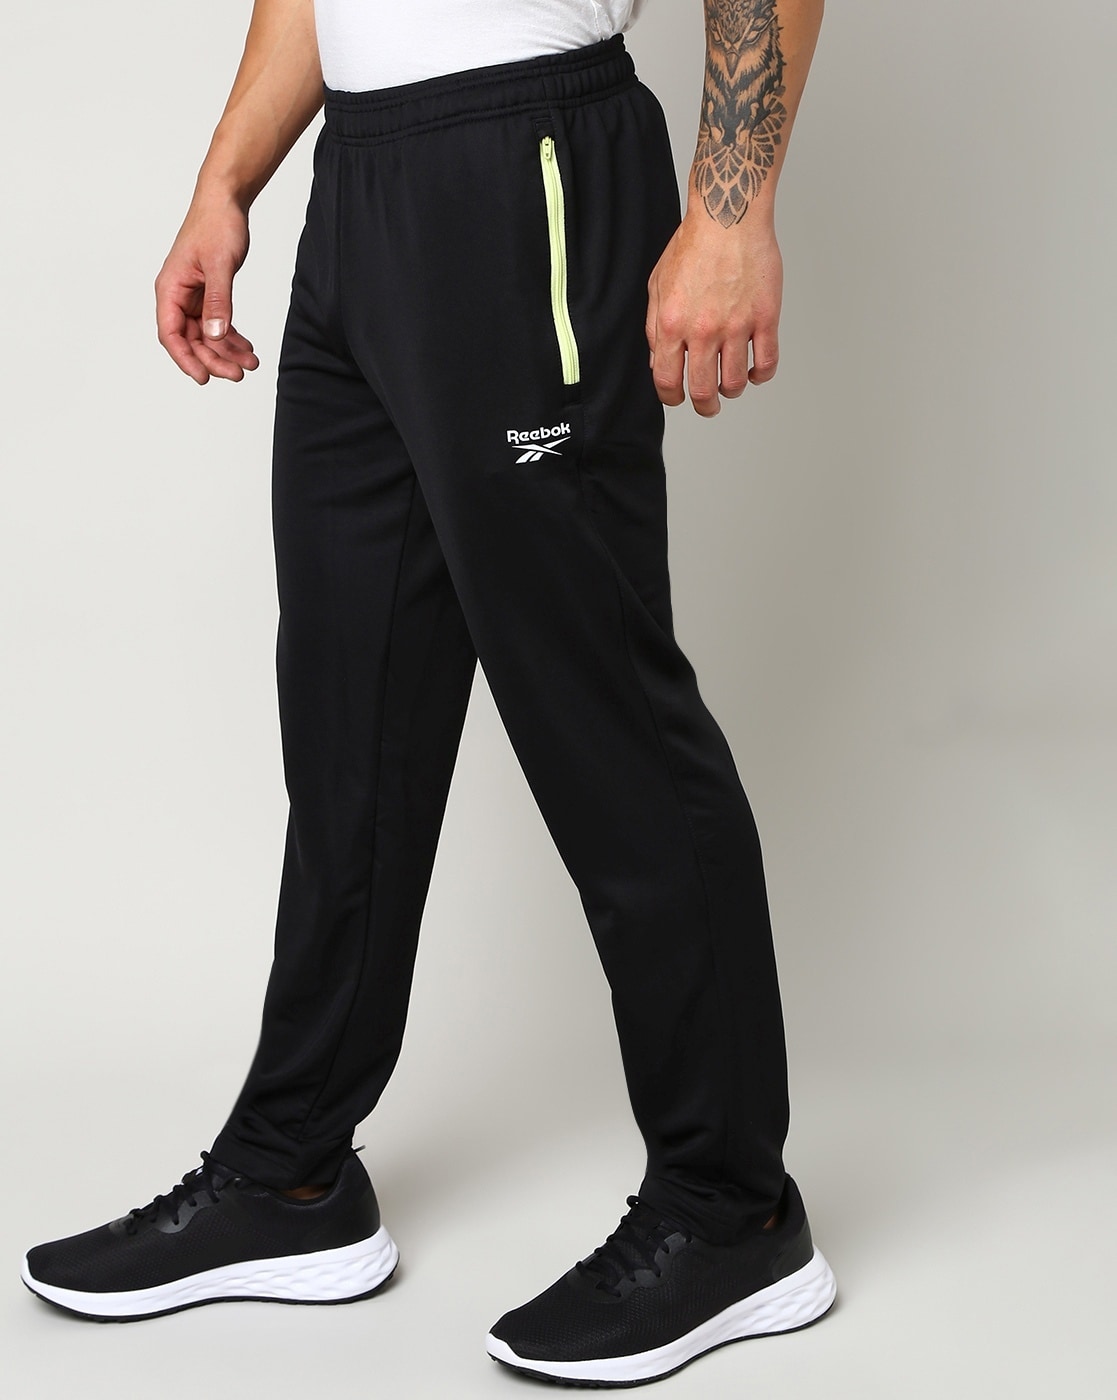 Reebok Sand Stone Track Pant - Get Best Price from Manufacturers &  Suppliers in India